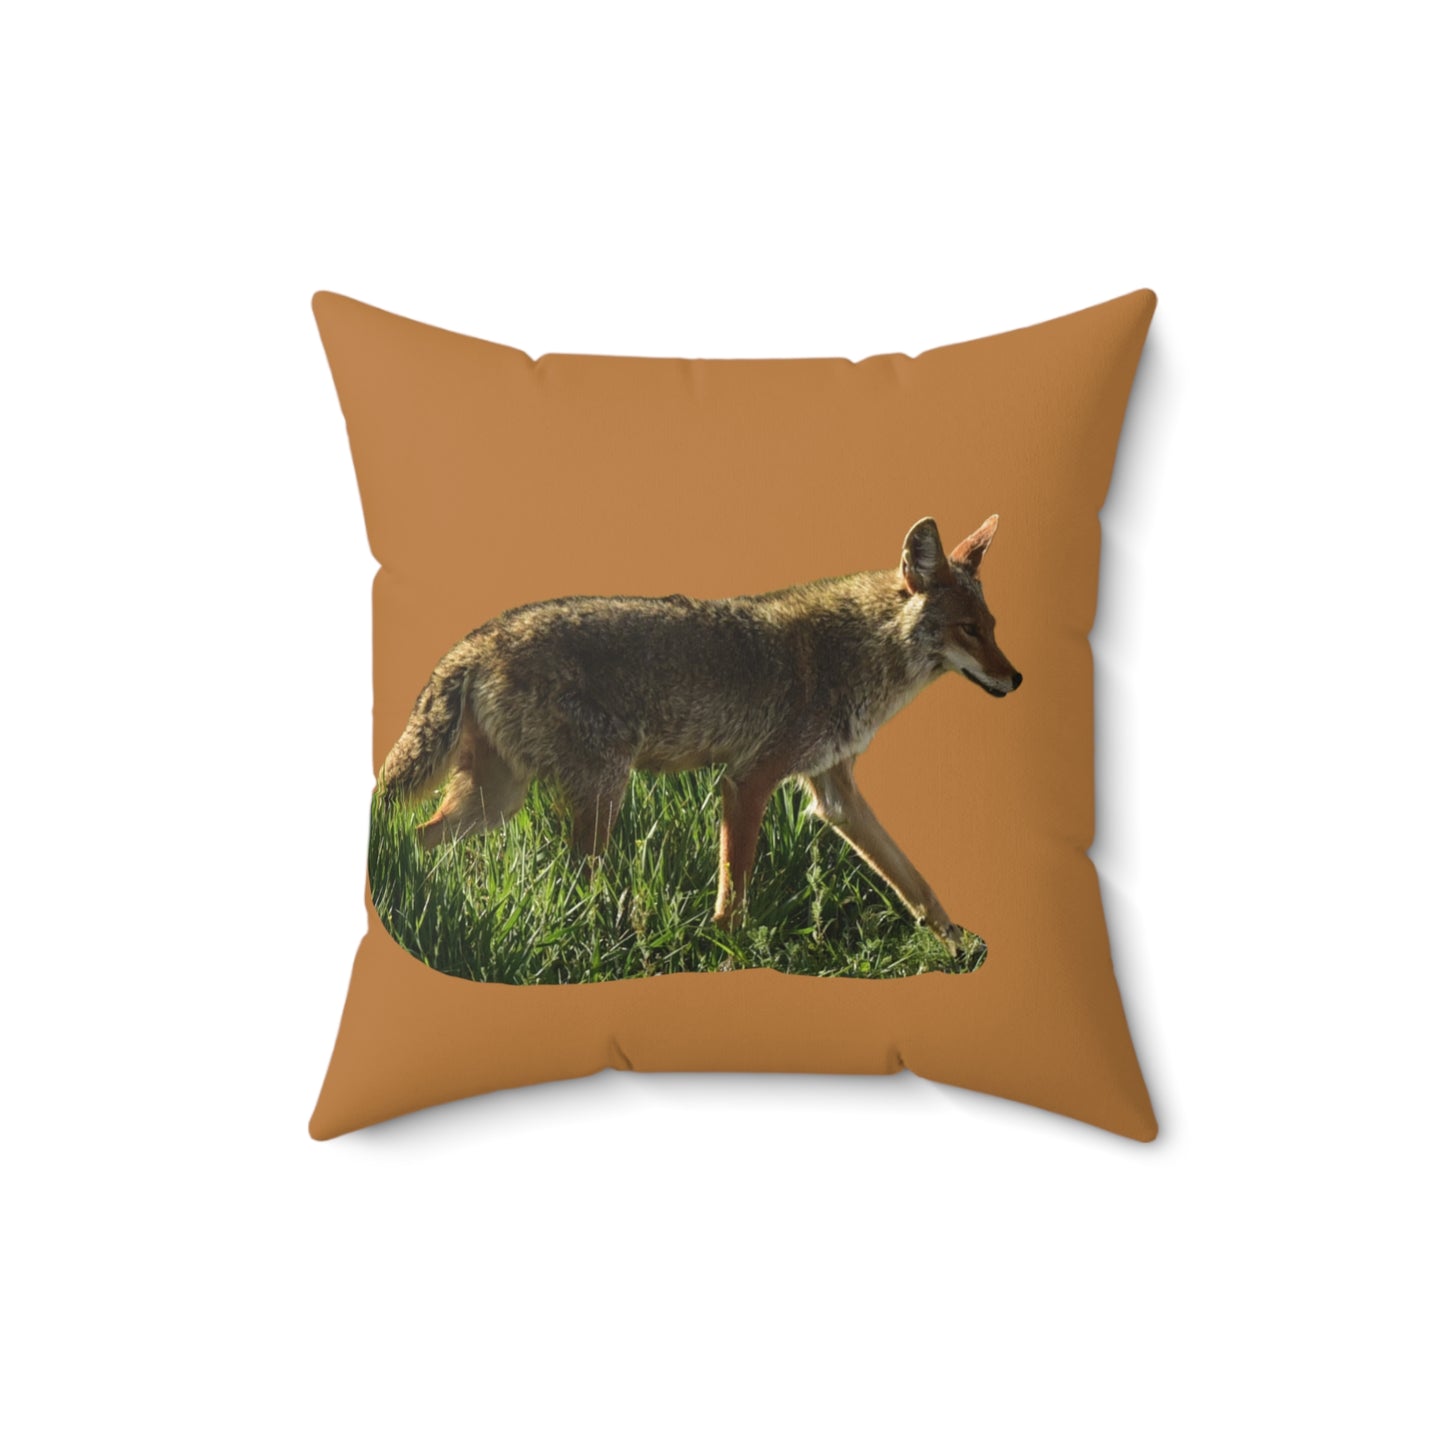 Coyote Spun Polyester Square Pillow